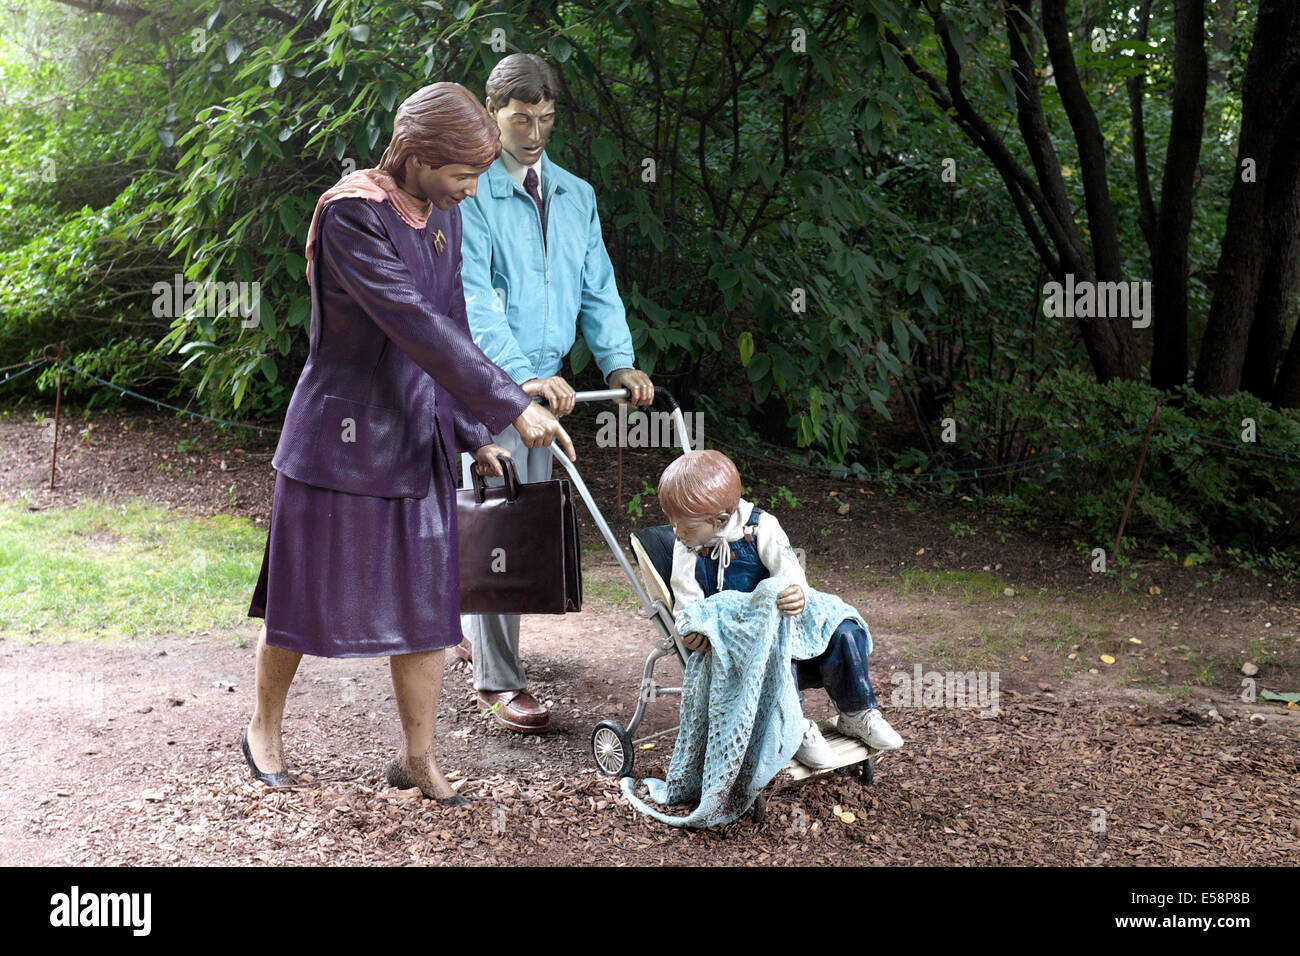 Changing Times - Parents pushing a child - Sculpture by Seward Johnson at the NJ Grounds for Sculpture Stock Photo